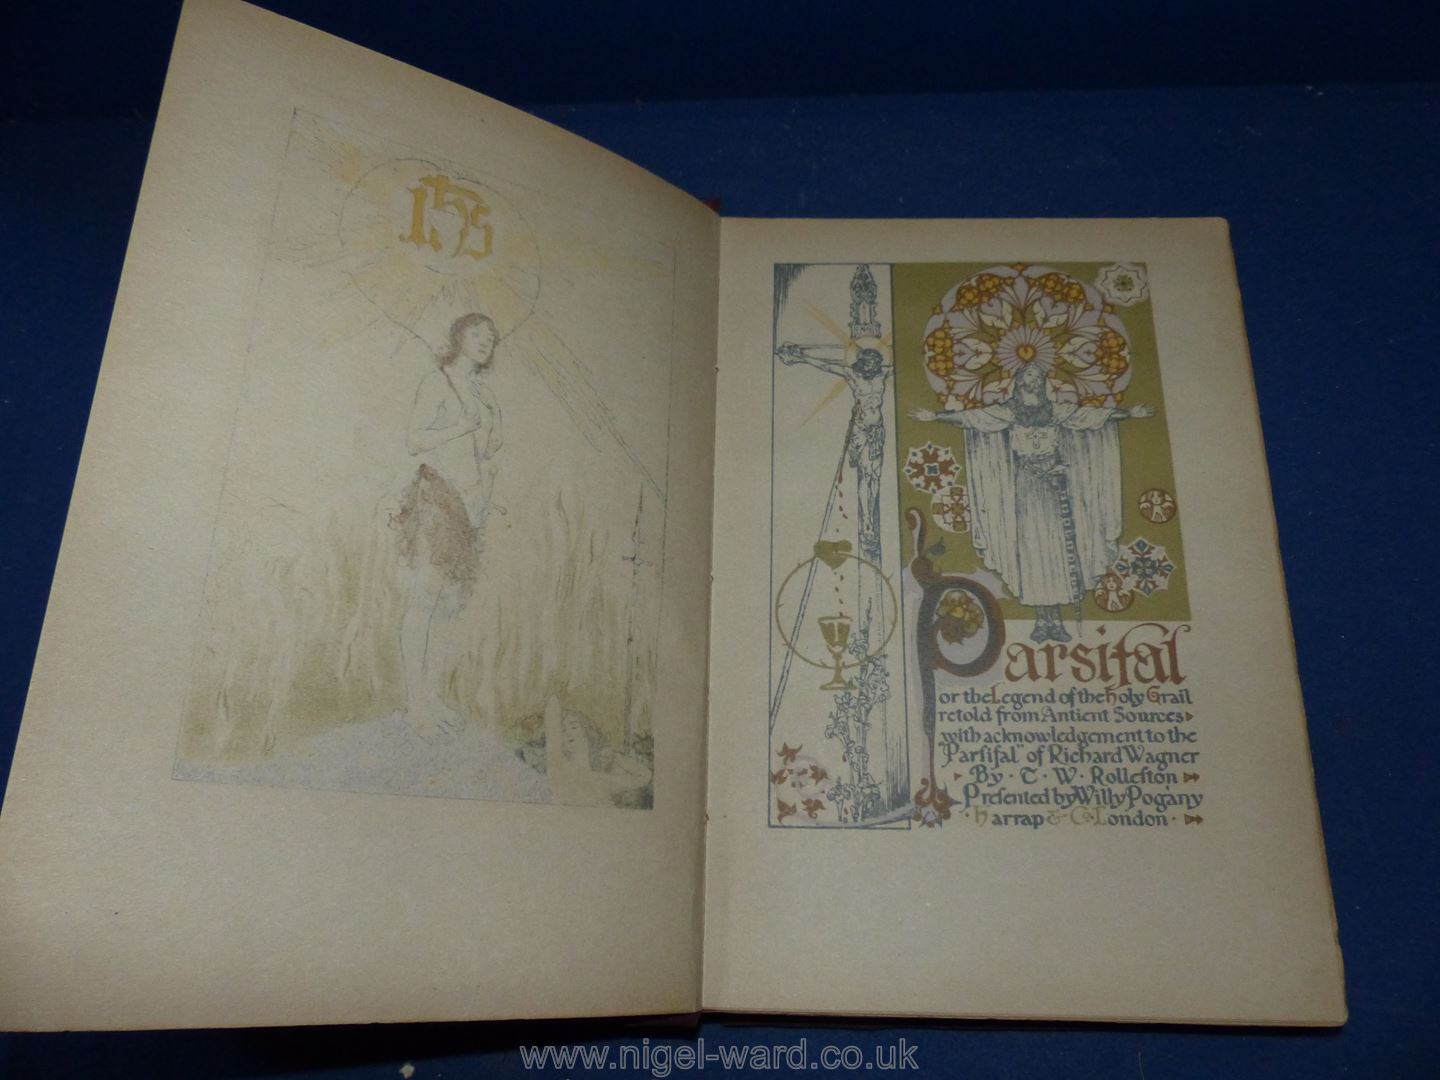 Parsifal by T.W. Rollerton, presented by Willy Pogany Harrap & Co. London 1912. - Image 2 of 7